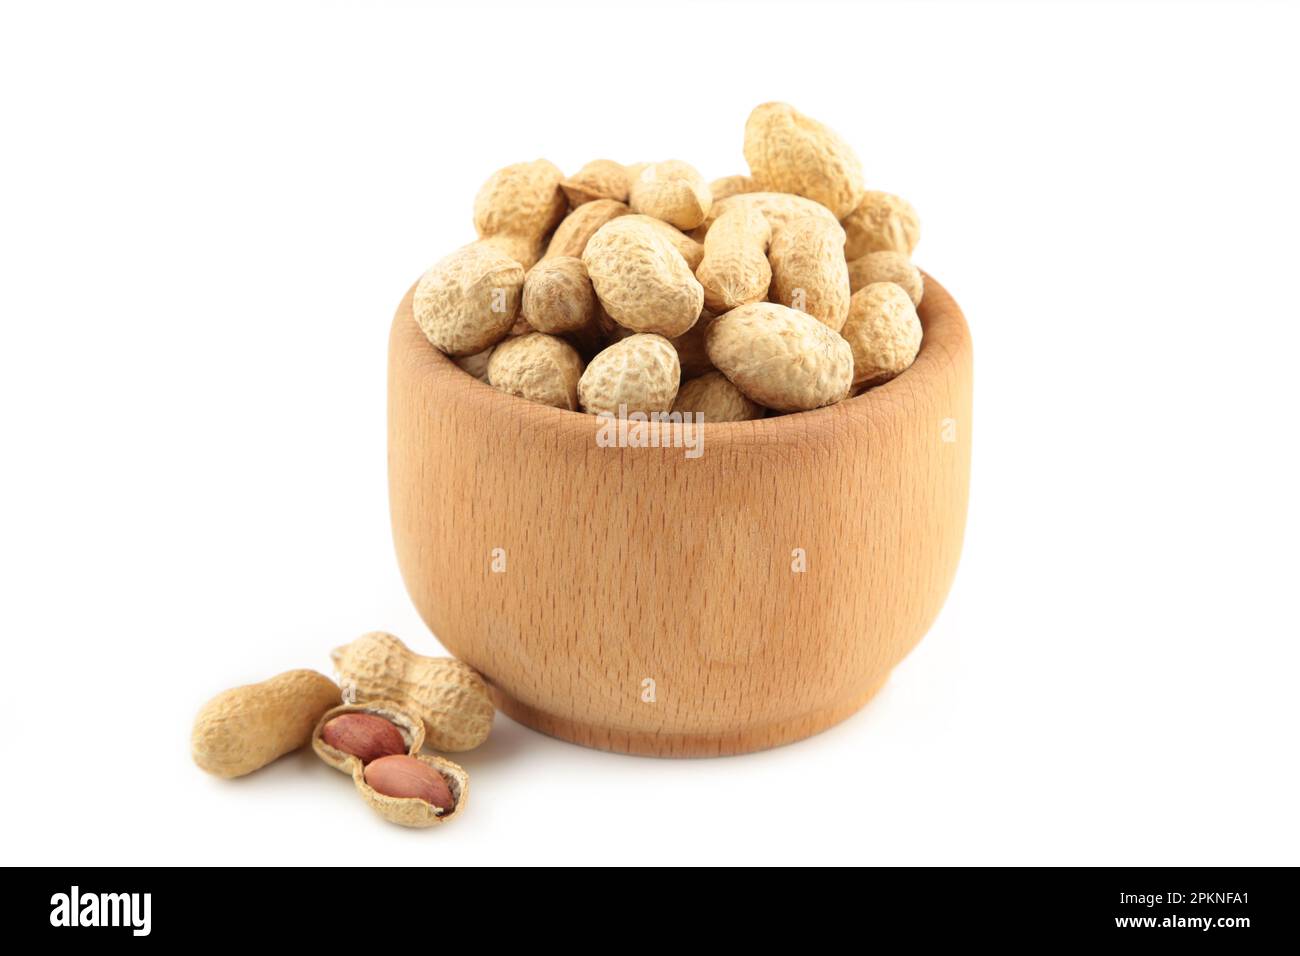 Dried peanuts in wooden bowl isolated on white background. Top view Stock Photo